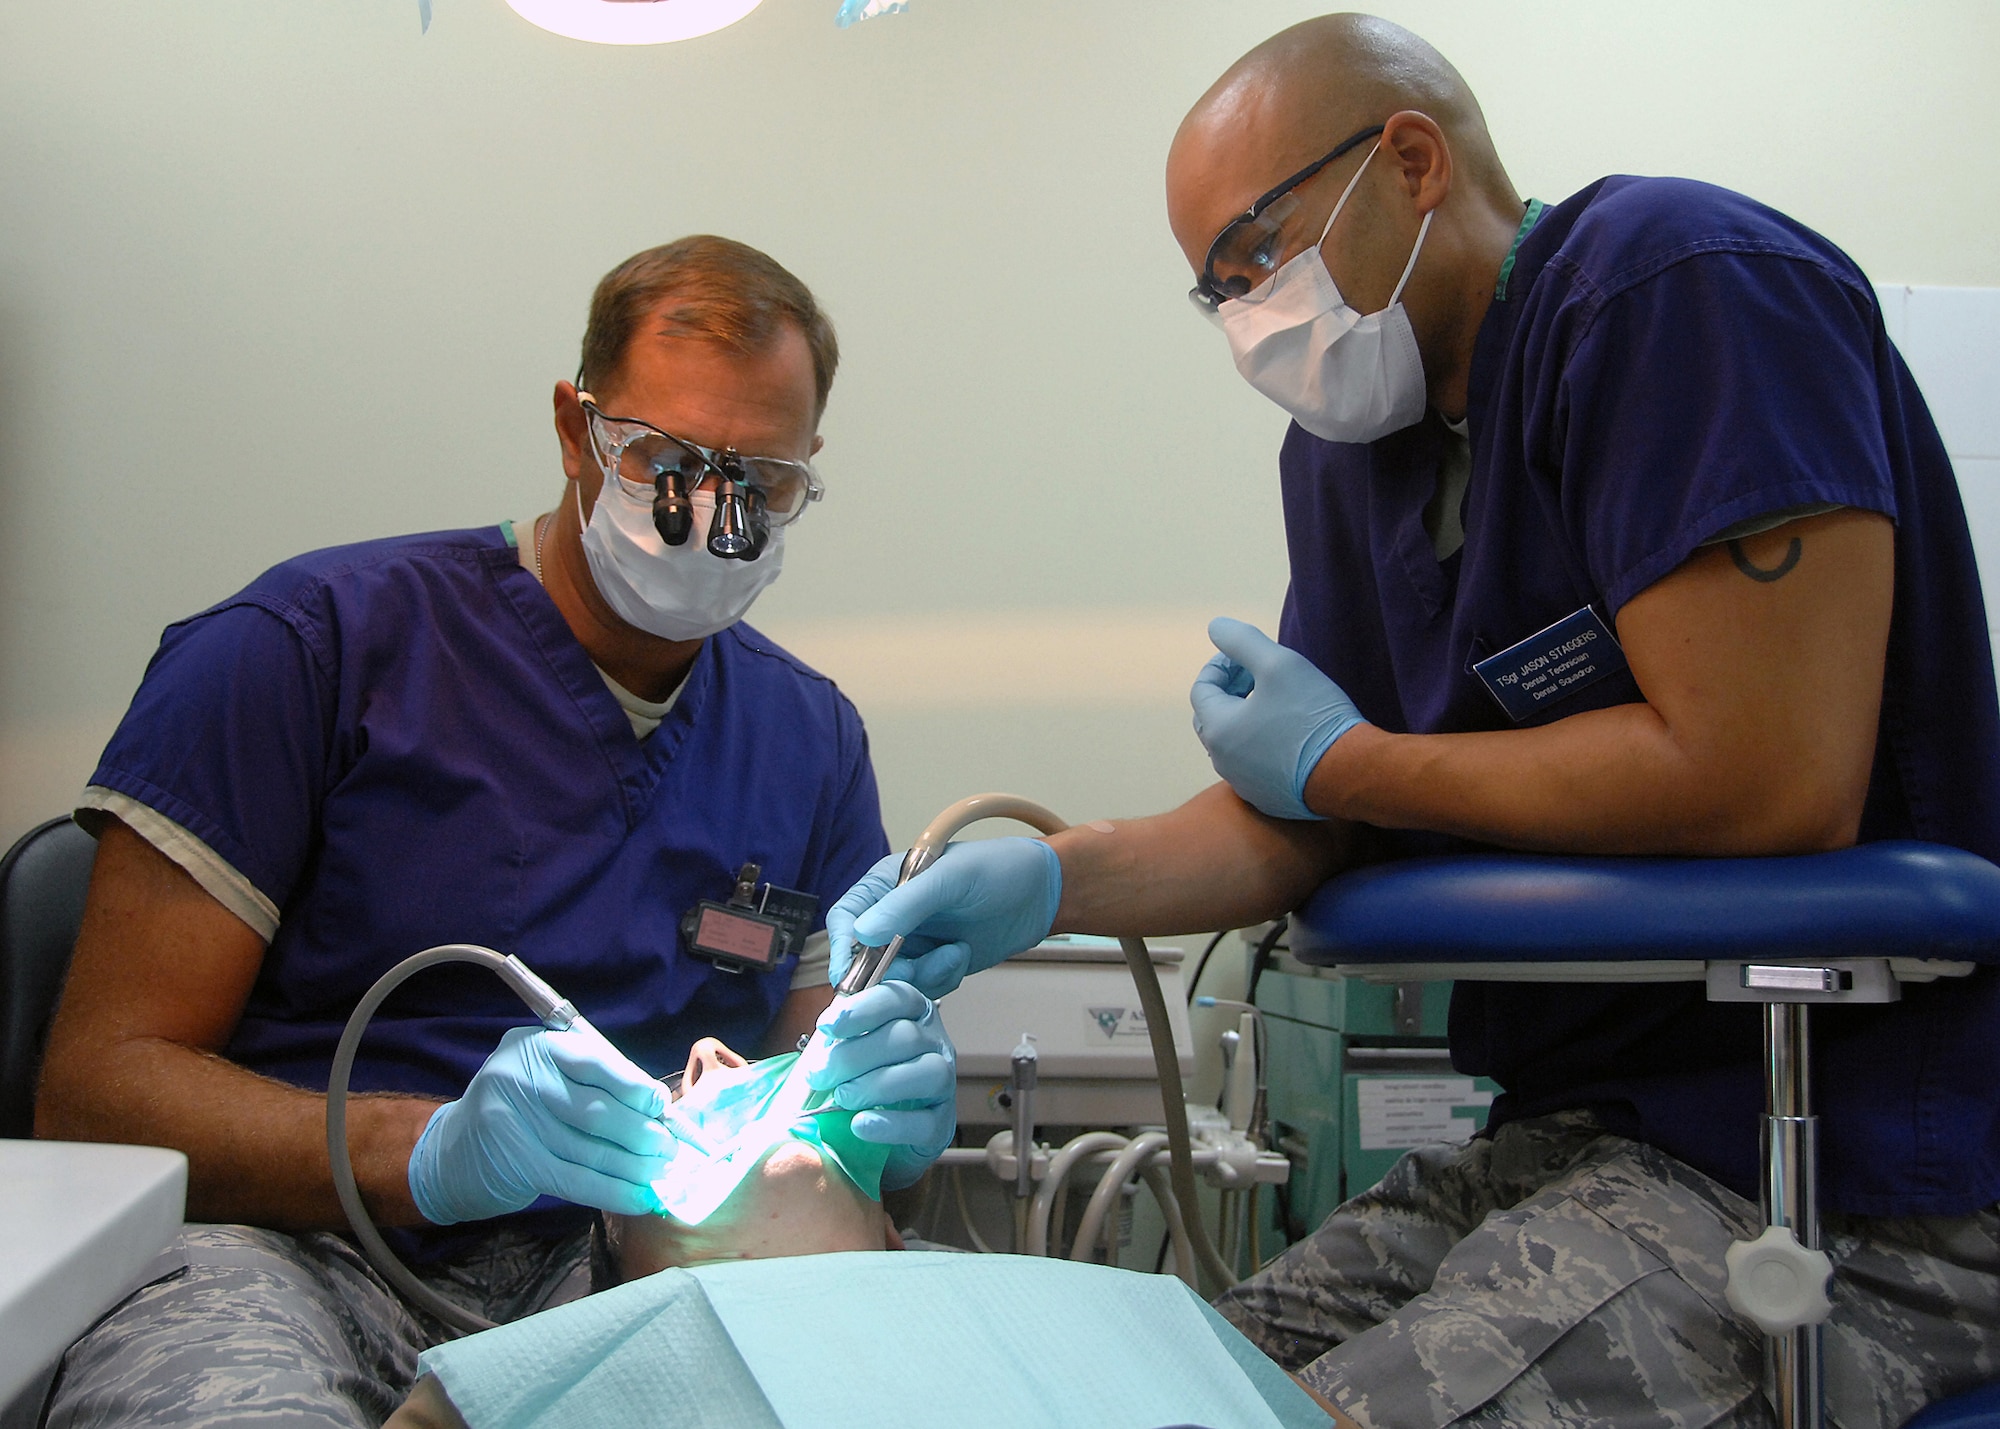 SOUTHWEST ASIA -- Lt. Col John Walton and Tech. Sgt. Jason Staggers, 386th Expeditionary Medical Group dental clinic, work together to repair Australian Air Force Sergeant Courtenay Brockman's broken tooth during an emergency visit on Nov. 4 at an air base in Southwest Asia. The dental clinic provides urgent care treatment to 386th Air Expeditionary Wing members, sister services and coalition members. Colonel Walton and Sergeant Staggers are deployed from Wright-Patterson Air Force Base, Ohio. (U.S. Air Force photo/Tech. Sgt. Raheem Moore)